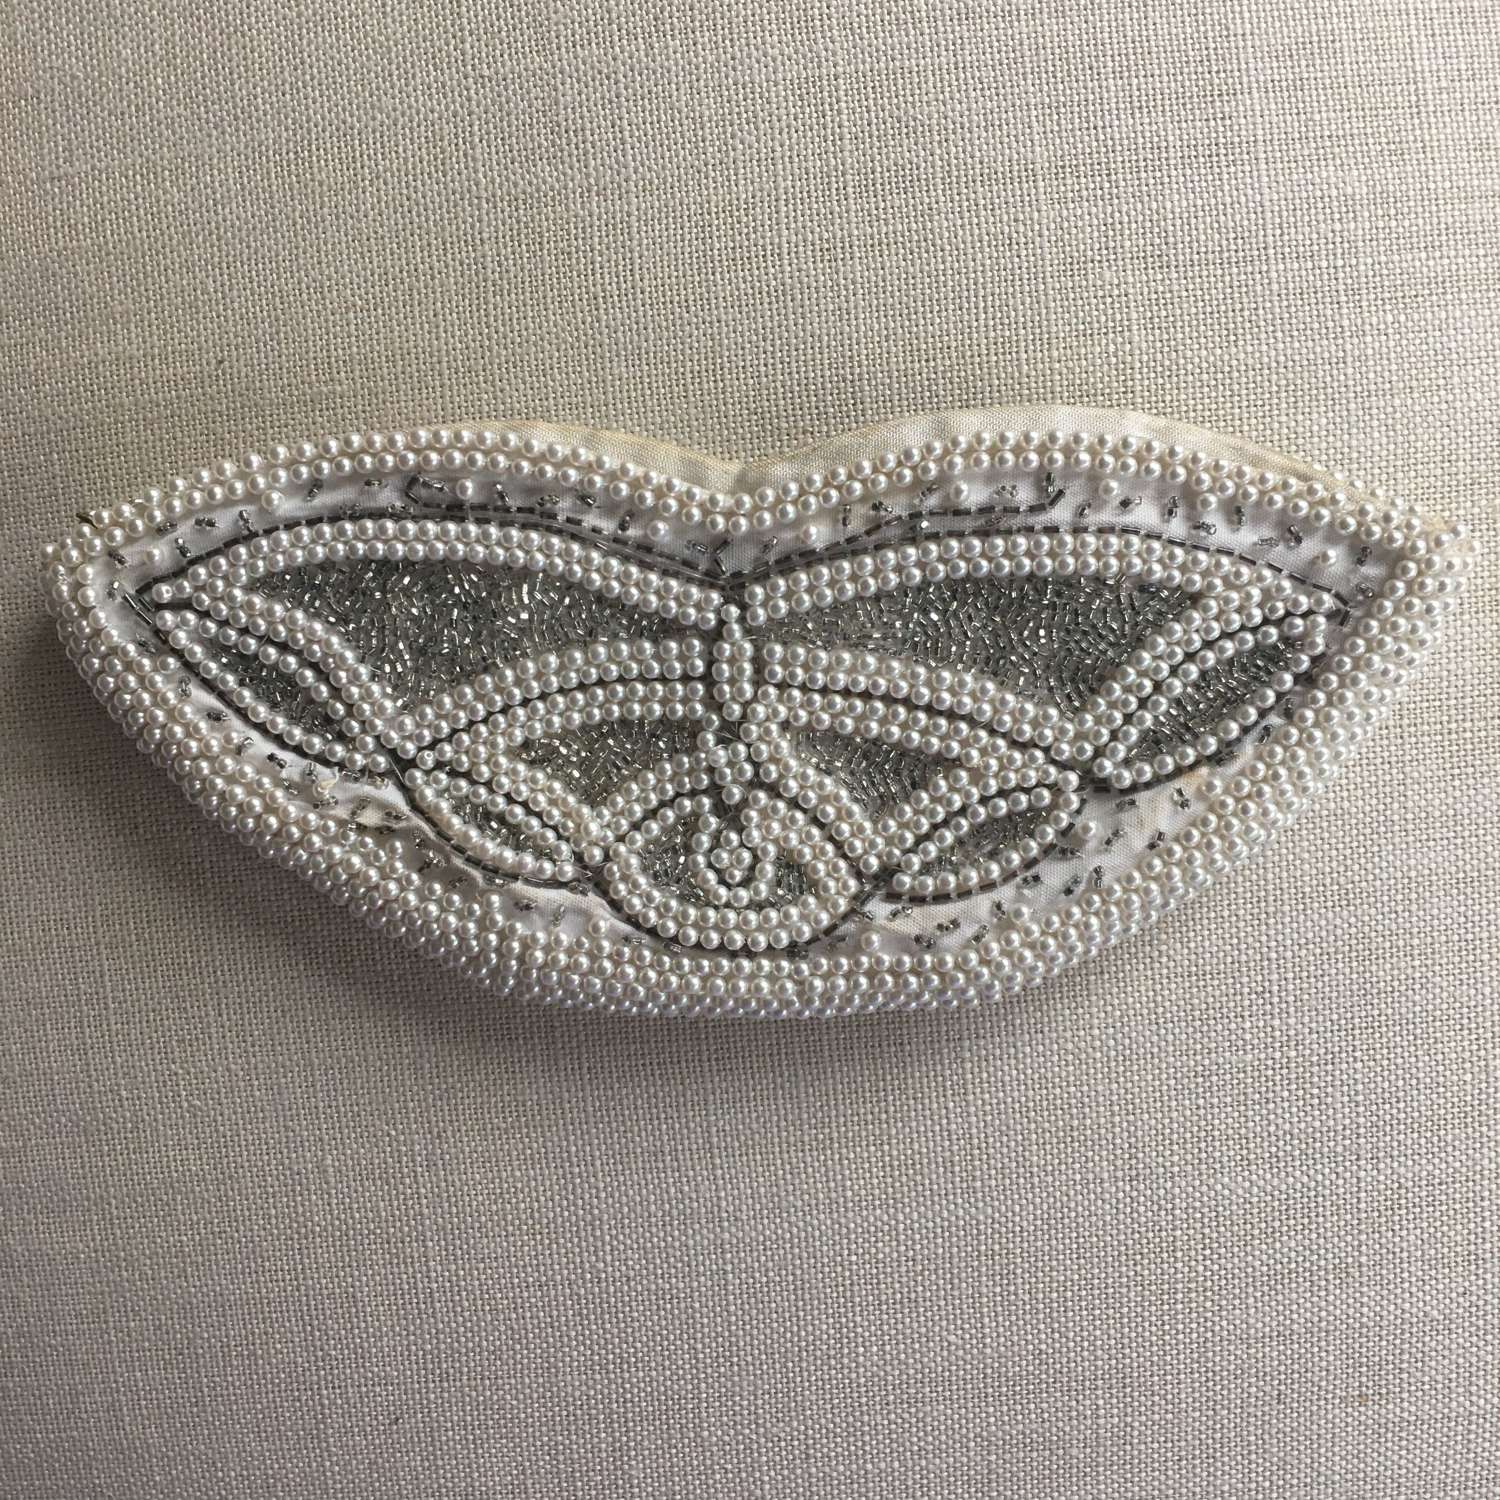 Vintage cream beaded bag with butterfly design